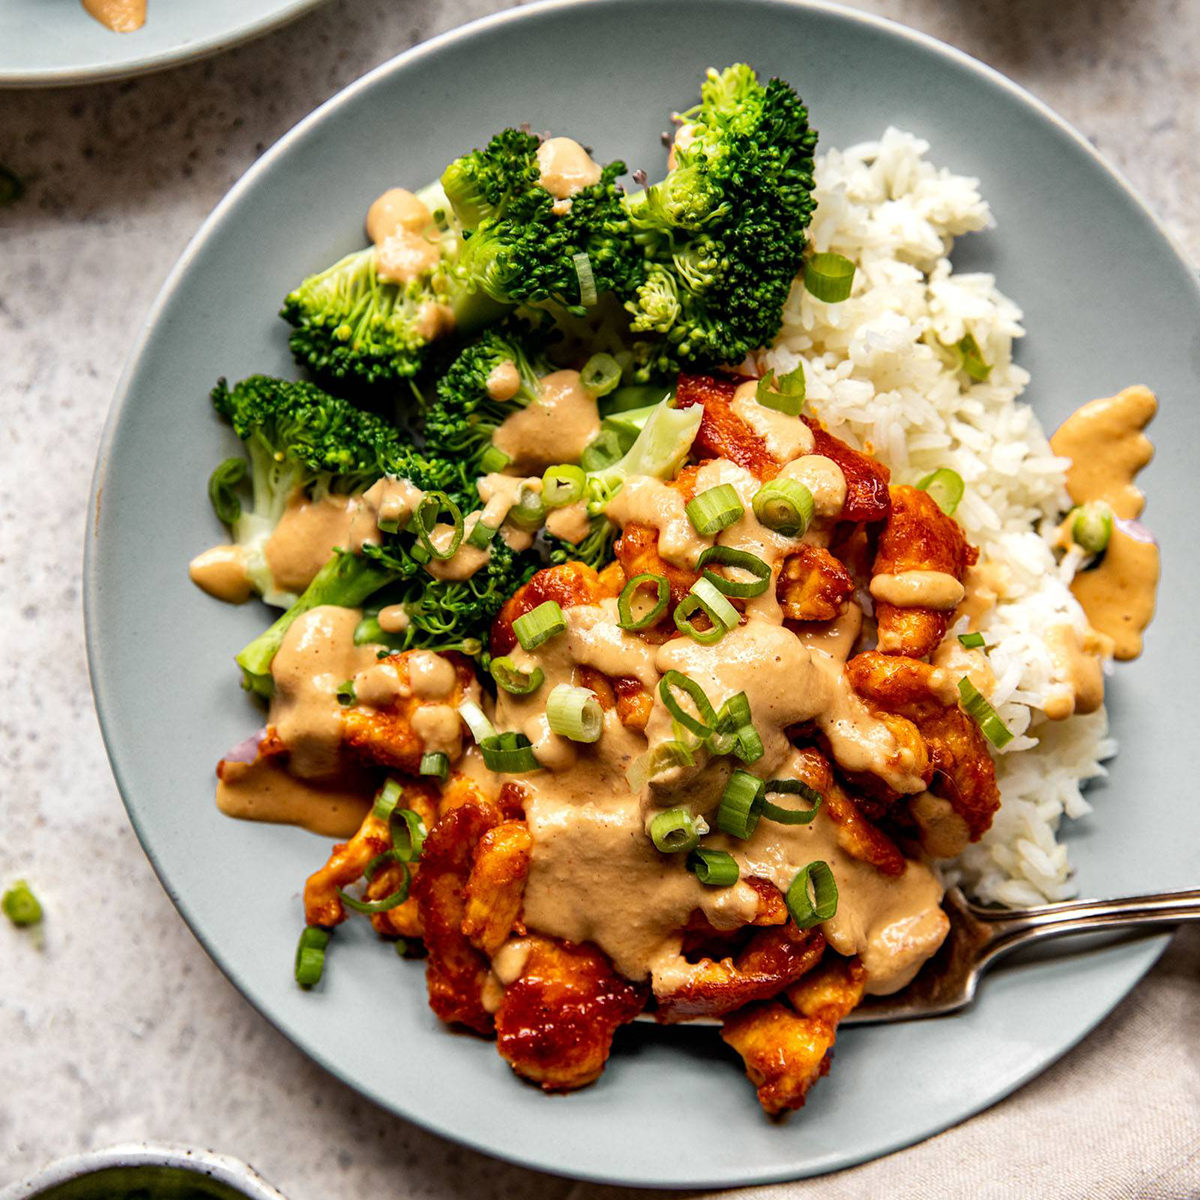 Curry chicken on a bed of rice and broccoli with spicy cashew sauce on top.